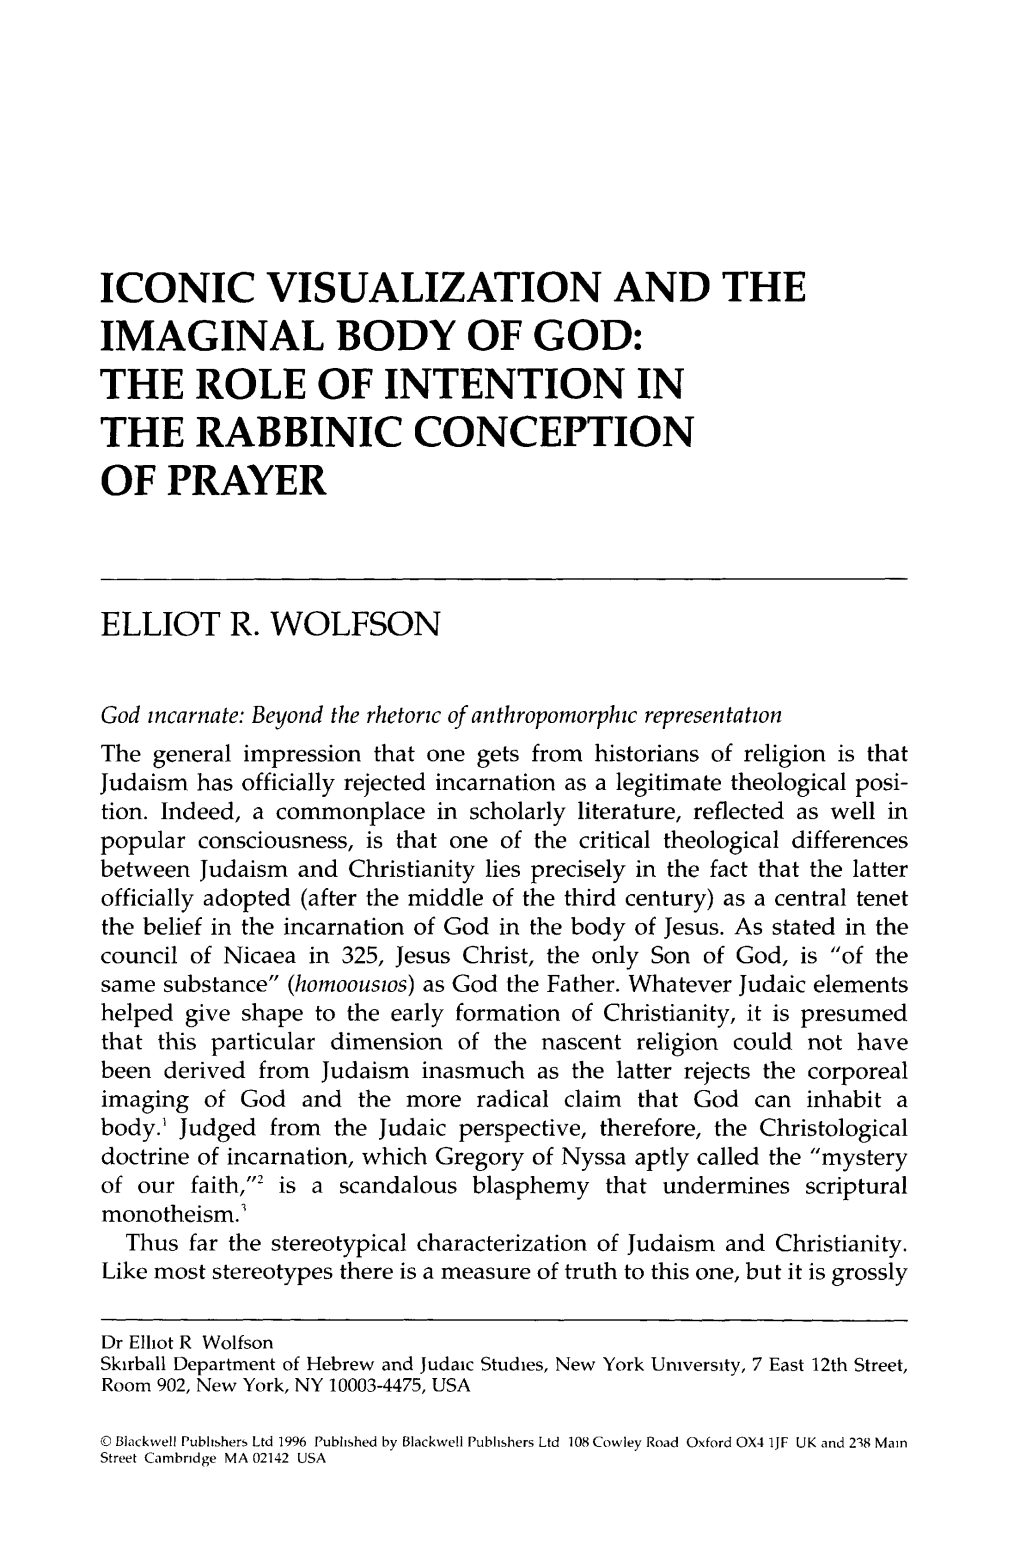 Iconic Visualization and the Imaginal Body of God: Intention in Rabbinic Prayer